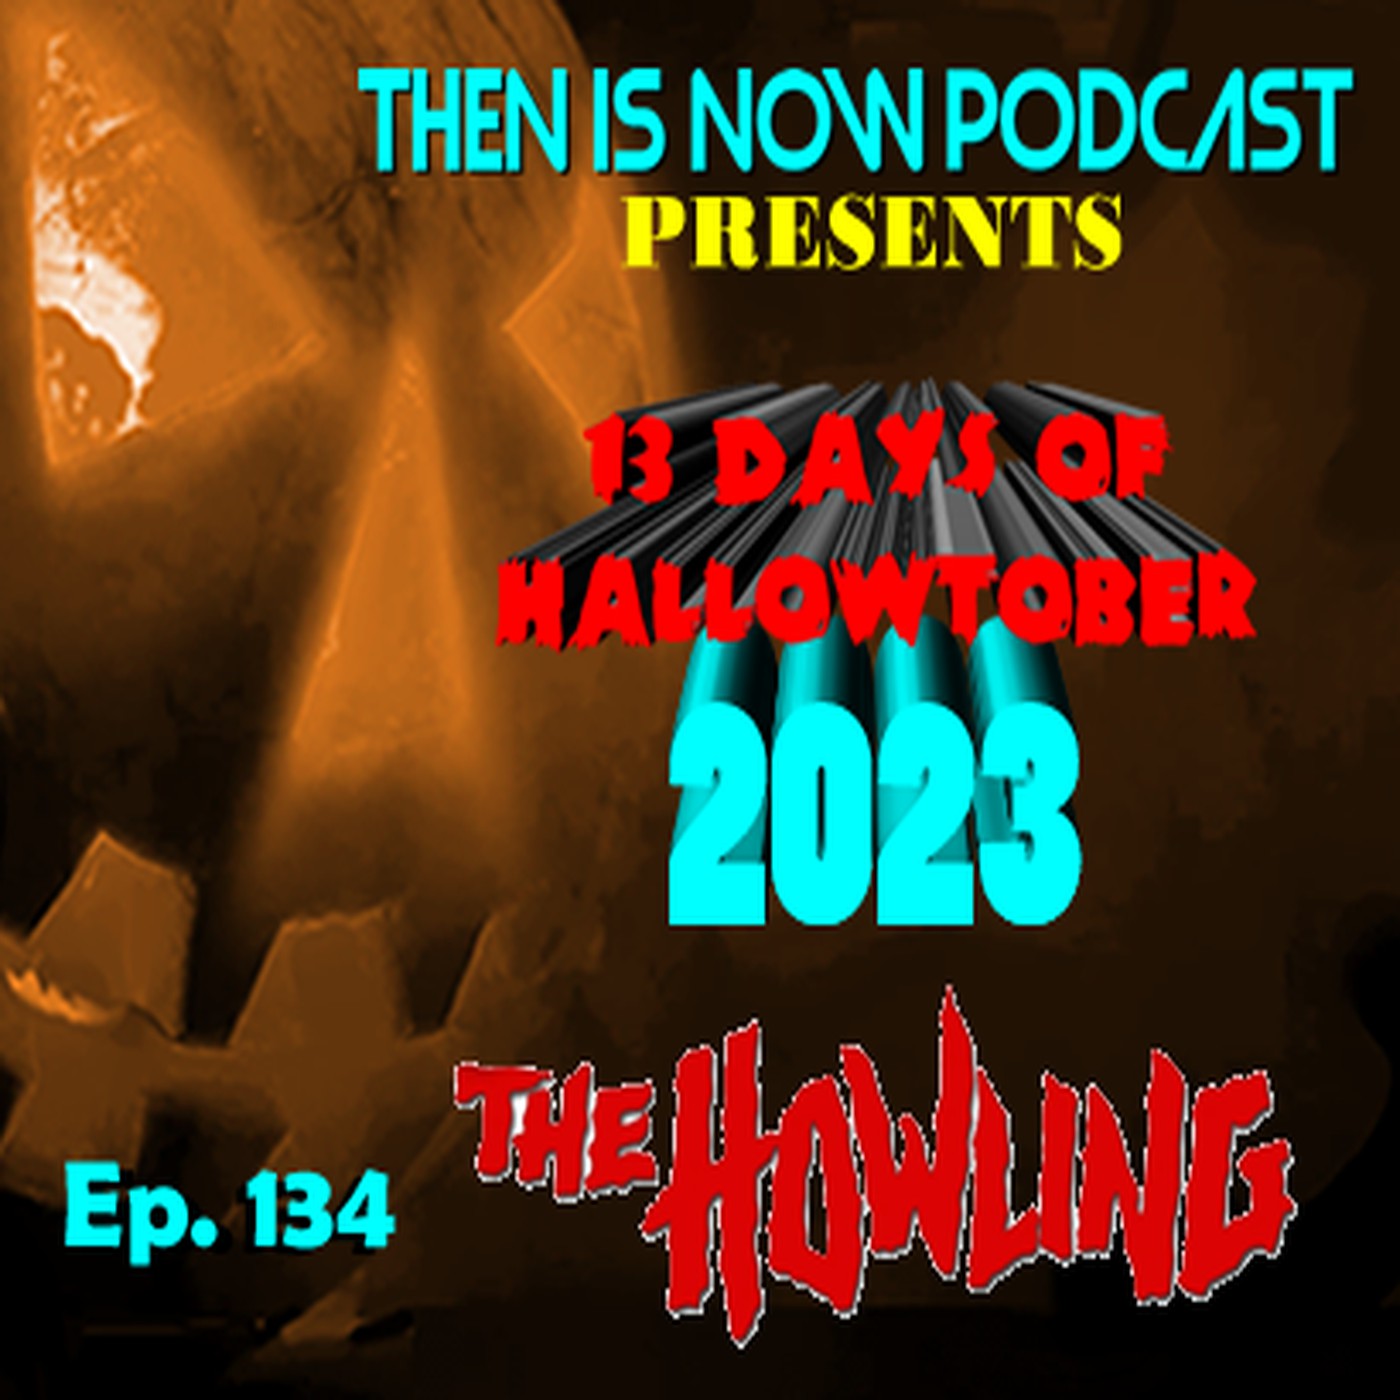 Then Is Now Ep. 134 - 13 Days of Hallowtober 2023 - The Howling (1981)